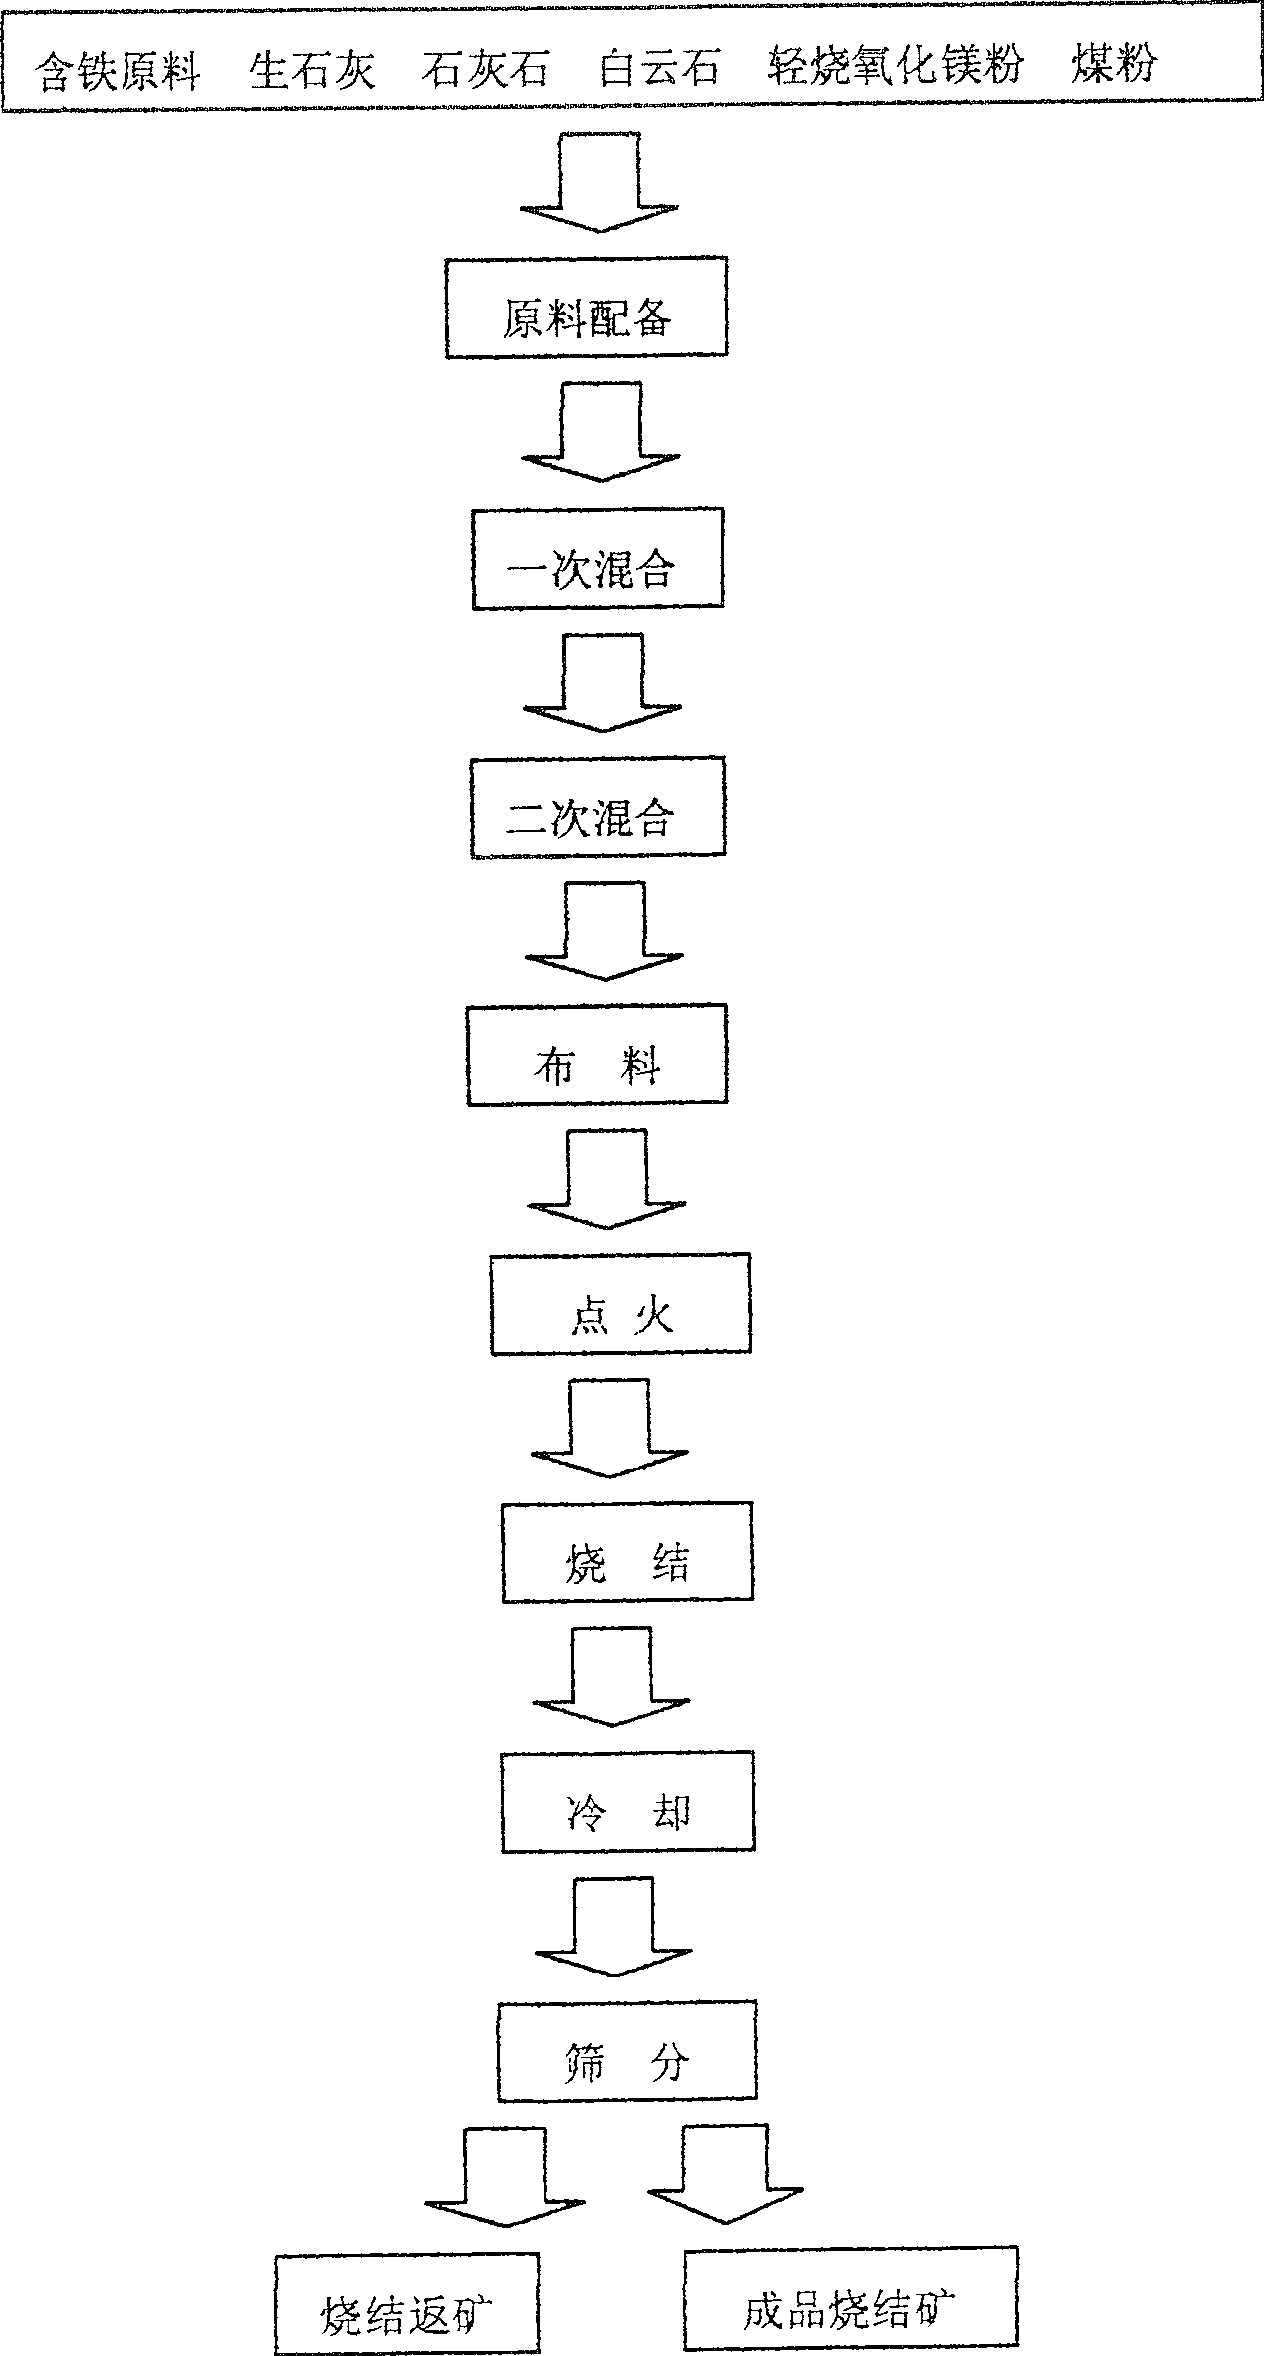 A sintered ore capable of improving viscosity of blast furnace slag and a preparation method thereof